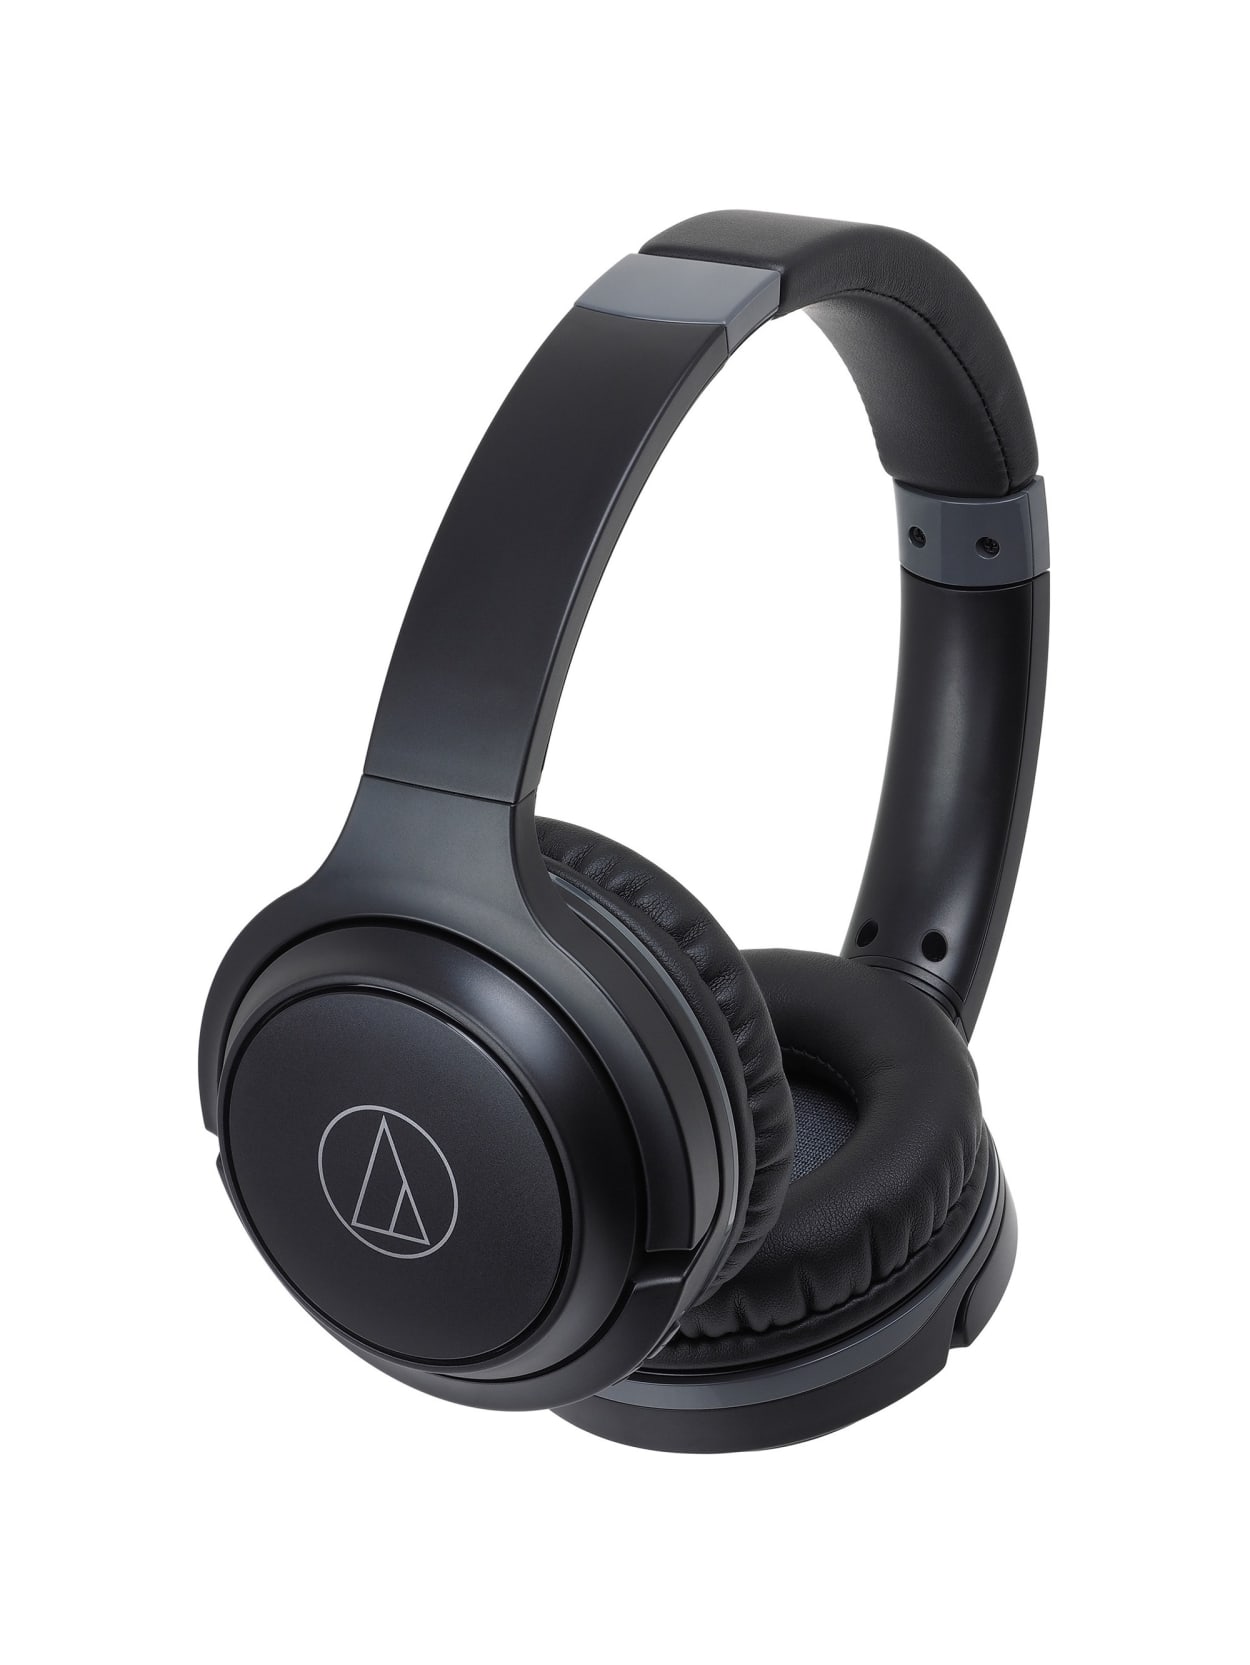 Audio Technica Ath S0bt Wireless On Ear Headphones With Built In Mic And Controls Stereo Wireless Bluetooth 32 Ohm 5 Hz 32 Khz Over The Head Binaural Circumaural Condenser Omni Directional Microphone